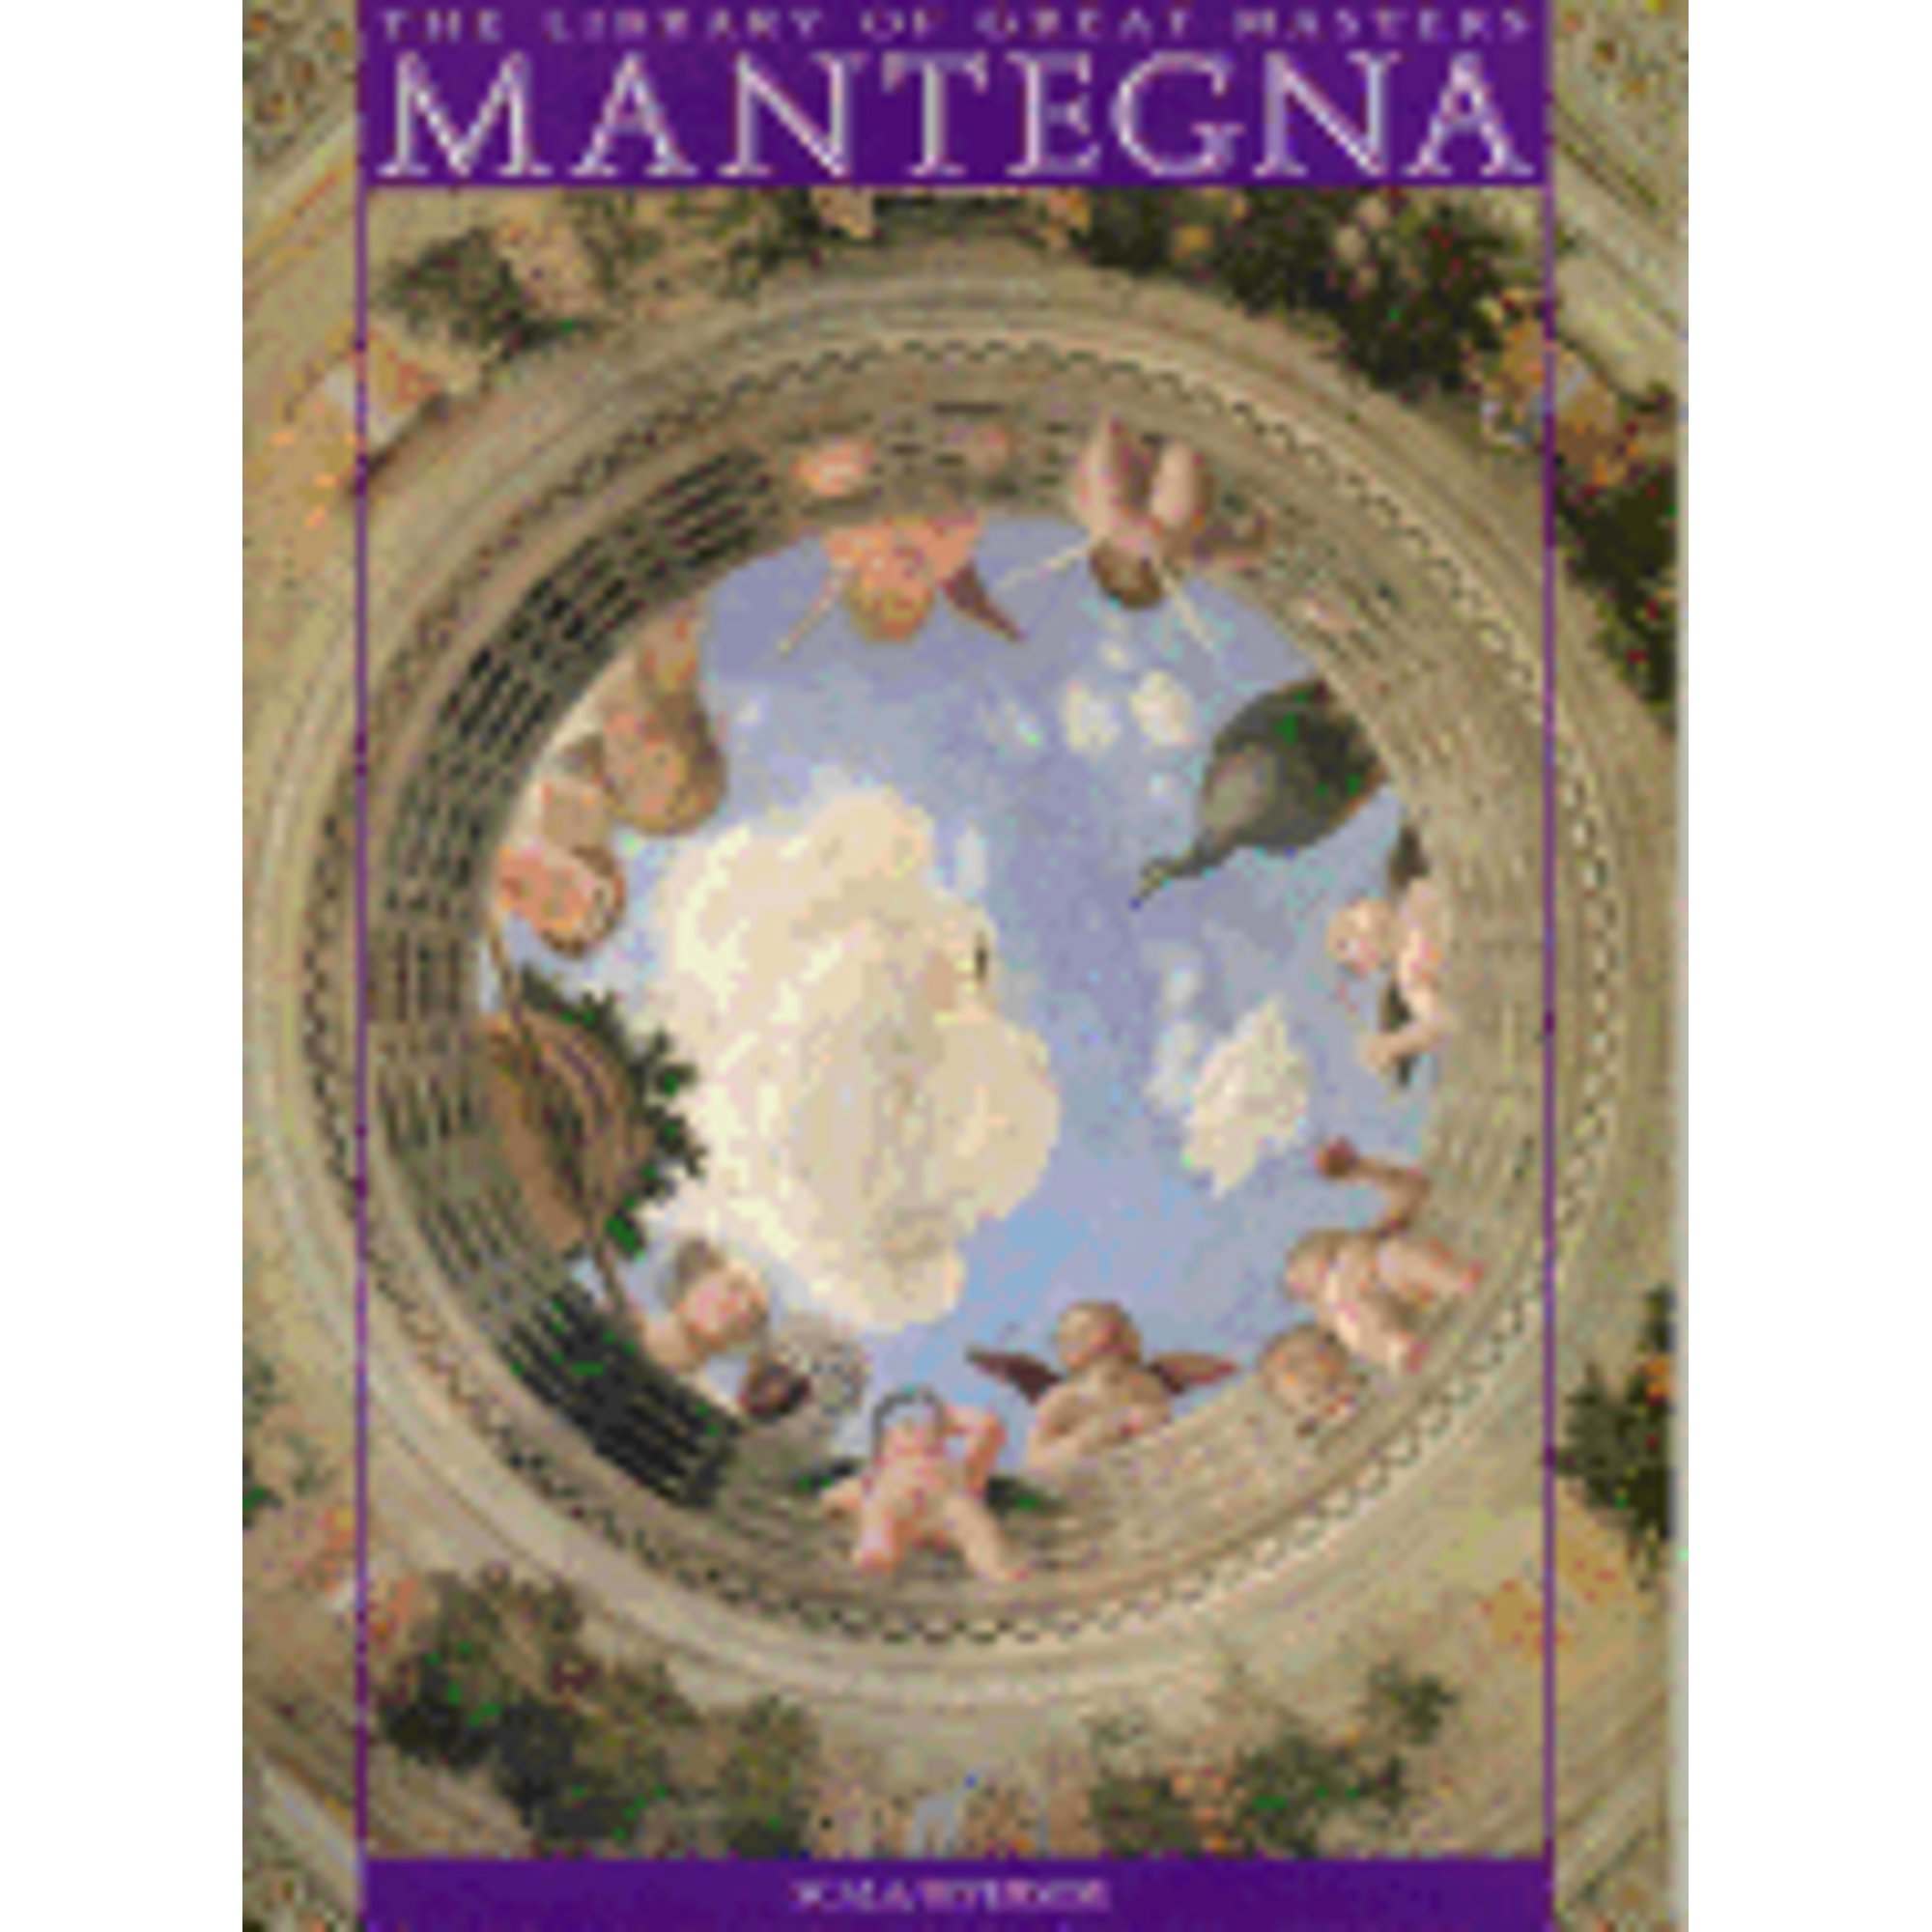 Pre-Owned Mantegna (Paperback 9781878351166) by Ettore Camesasca, Susan M Lister - image 1 of 1